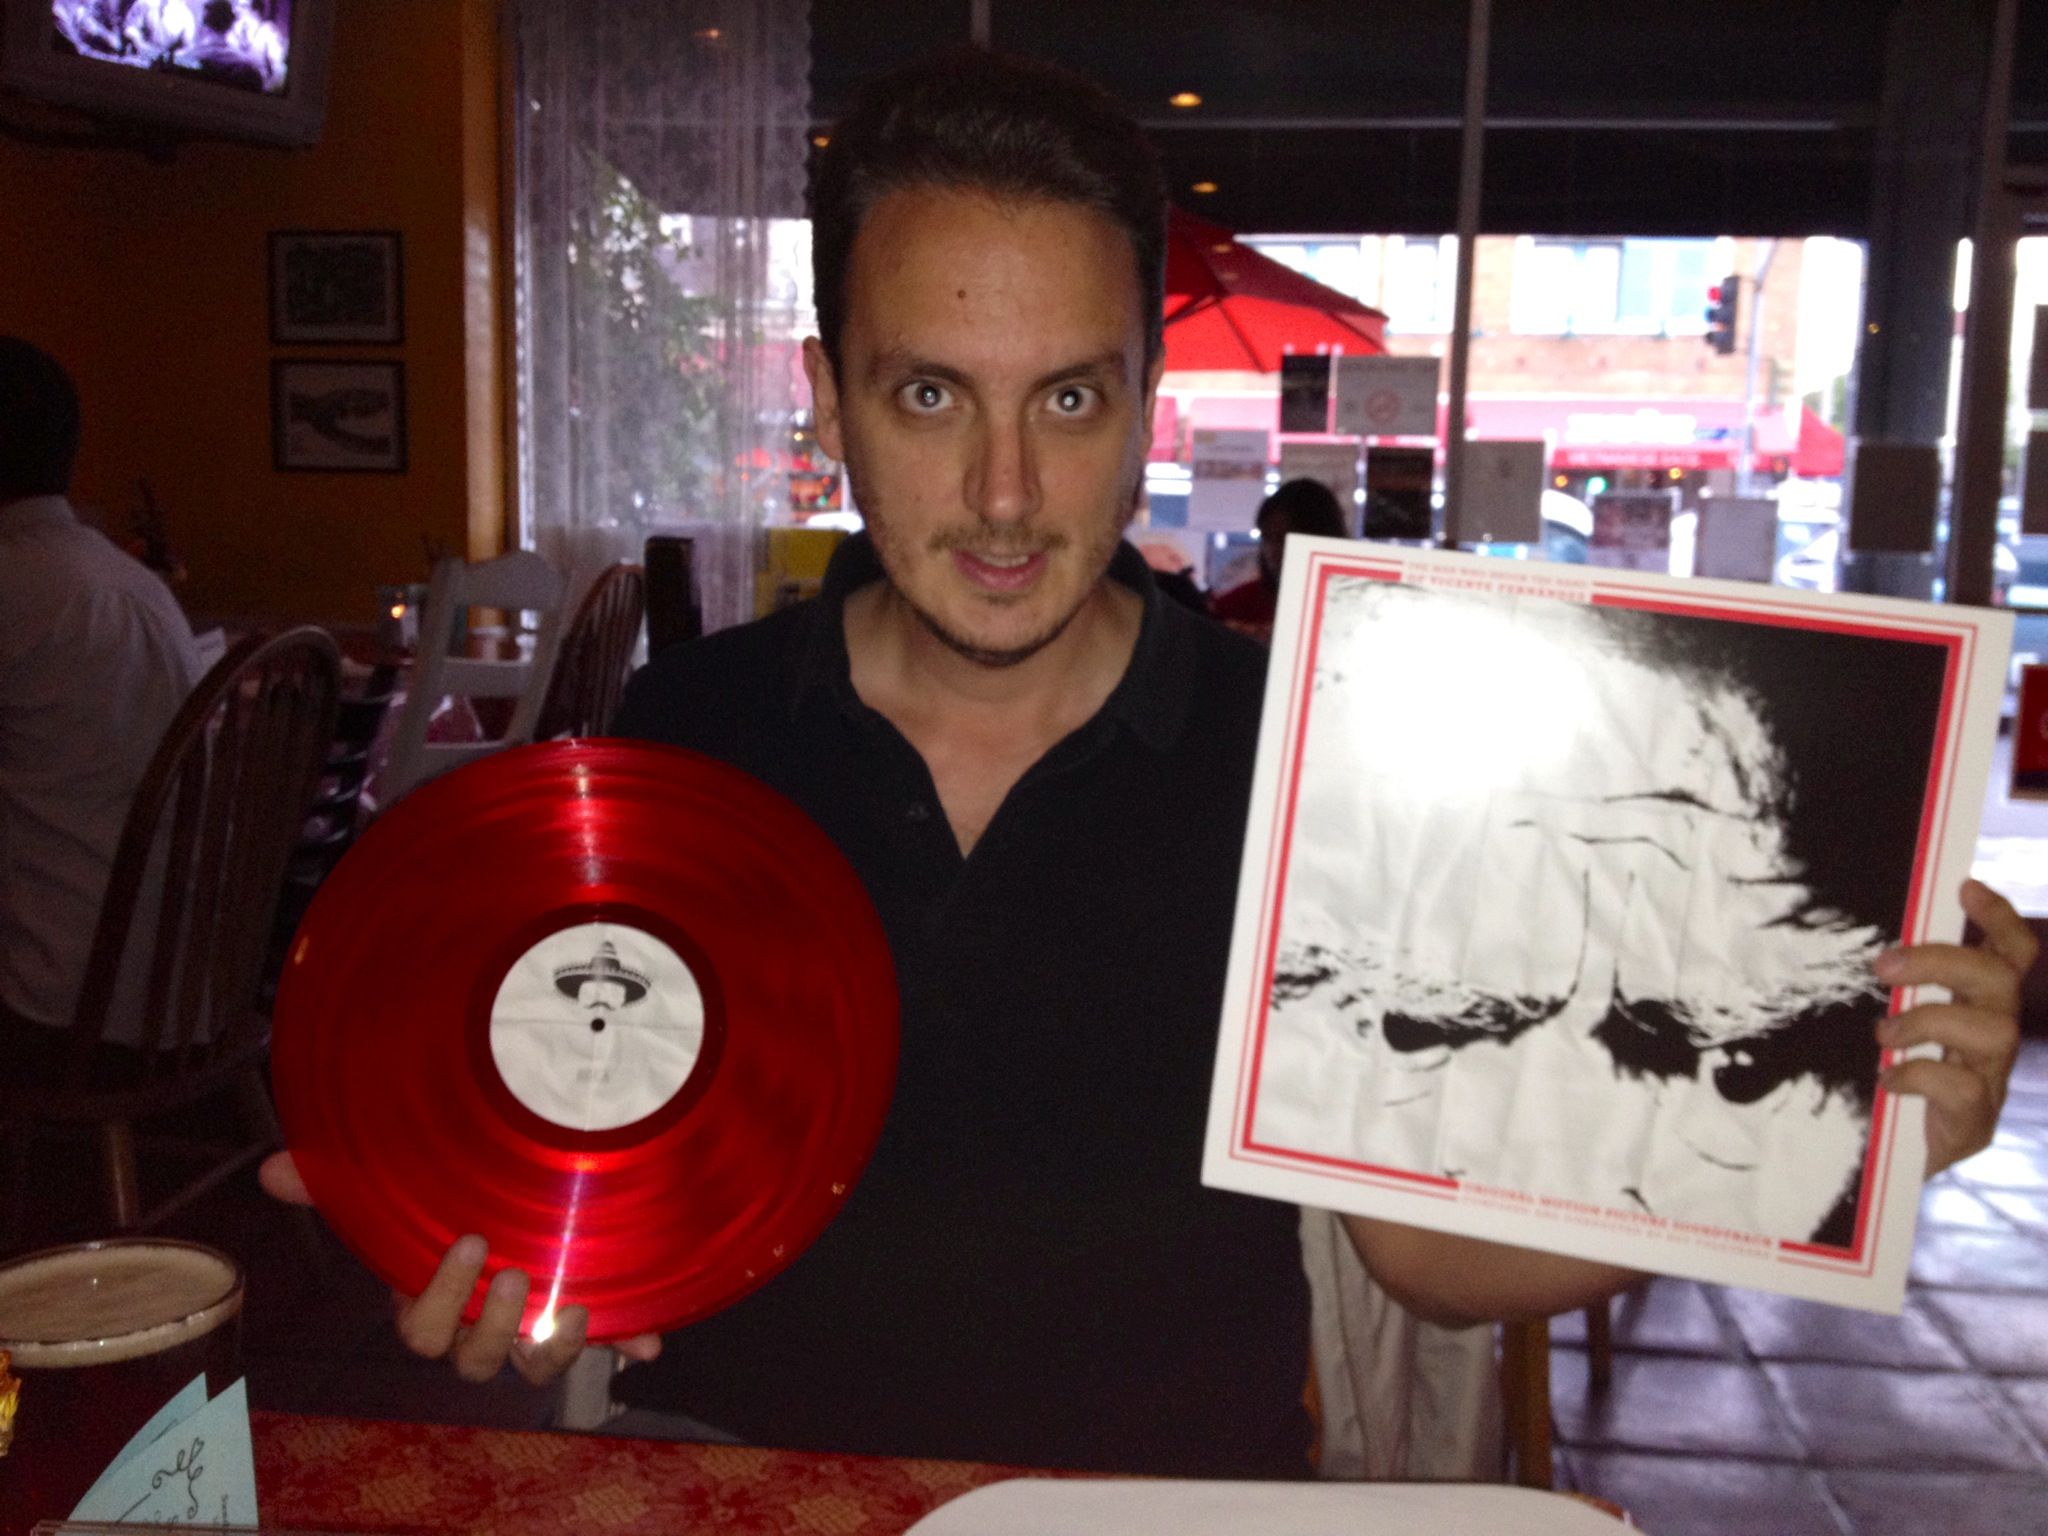 The man who shook the hand of Vicente Fernandez' soundtrack on vinyl!